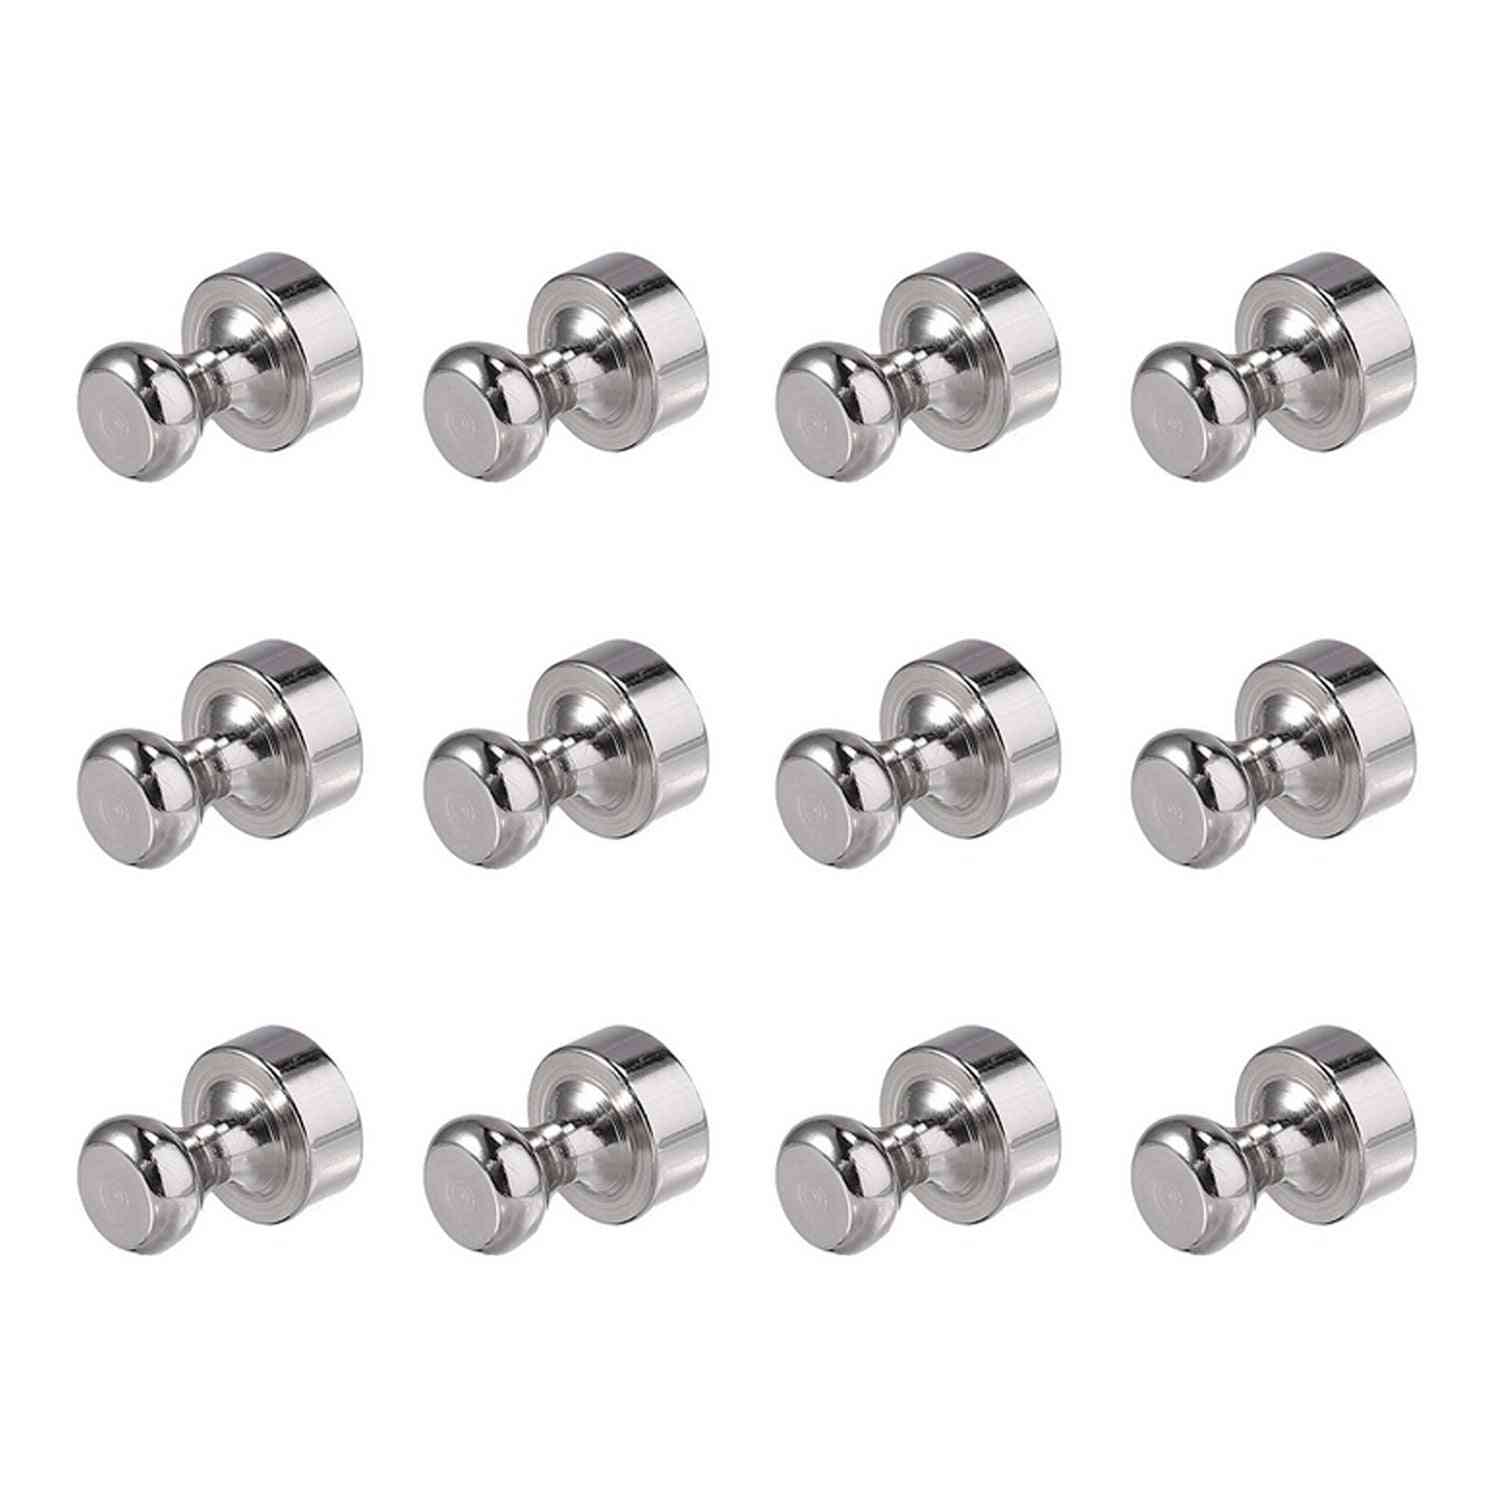 Metal Magnetic Push Pins For Refrigerator/whiteboard/map/calendar/home/ Office/ School Supplies